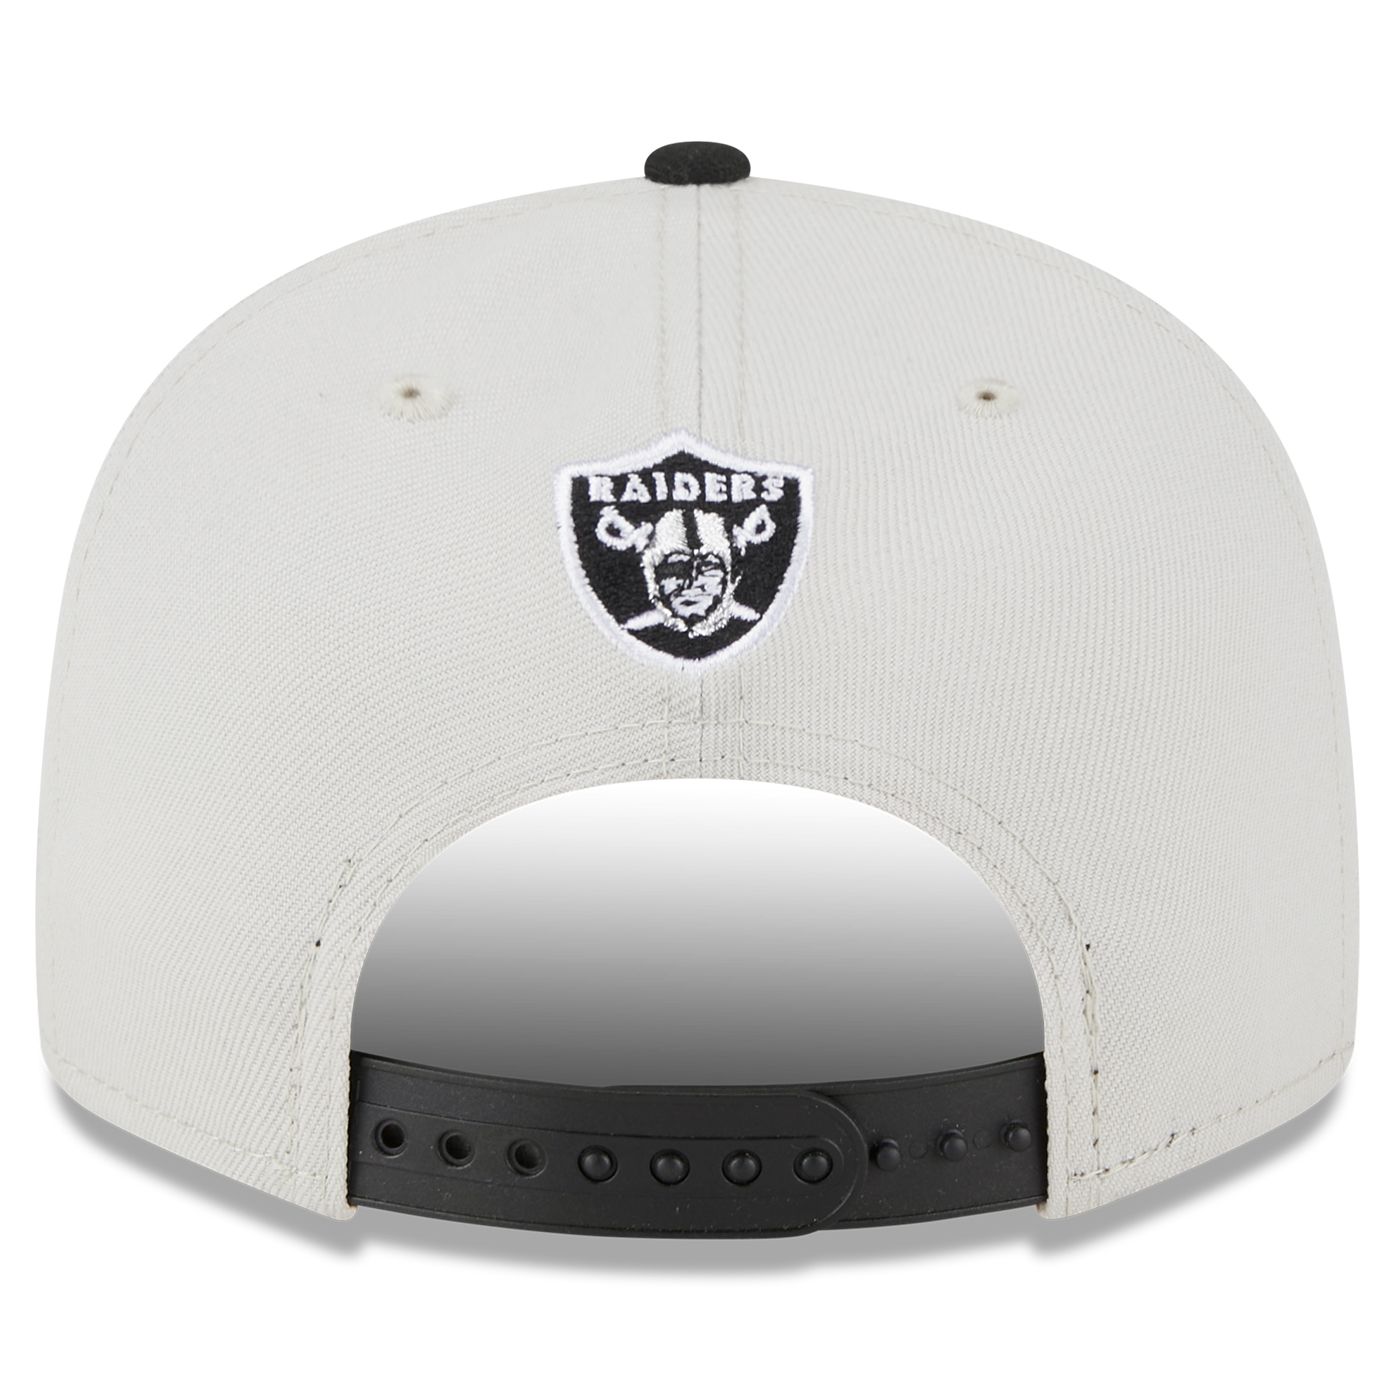 Las Vegas Raiders NFL draft hats and jerseys debut! - Silver And